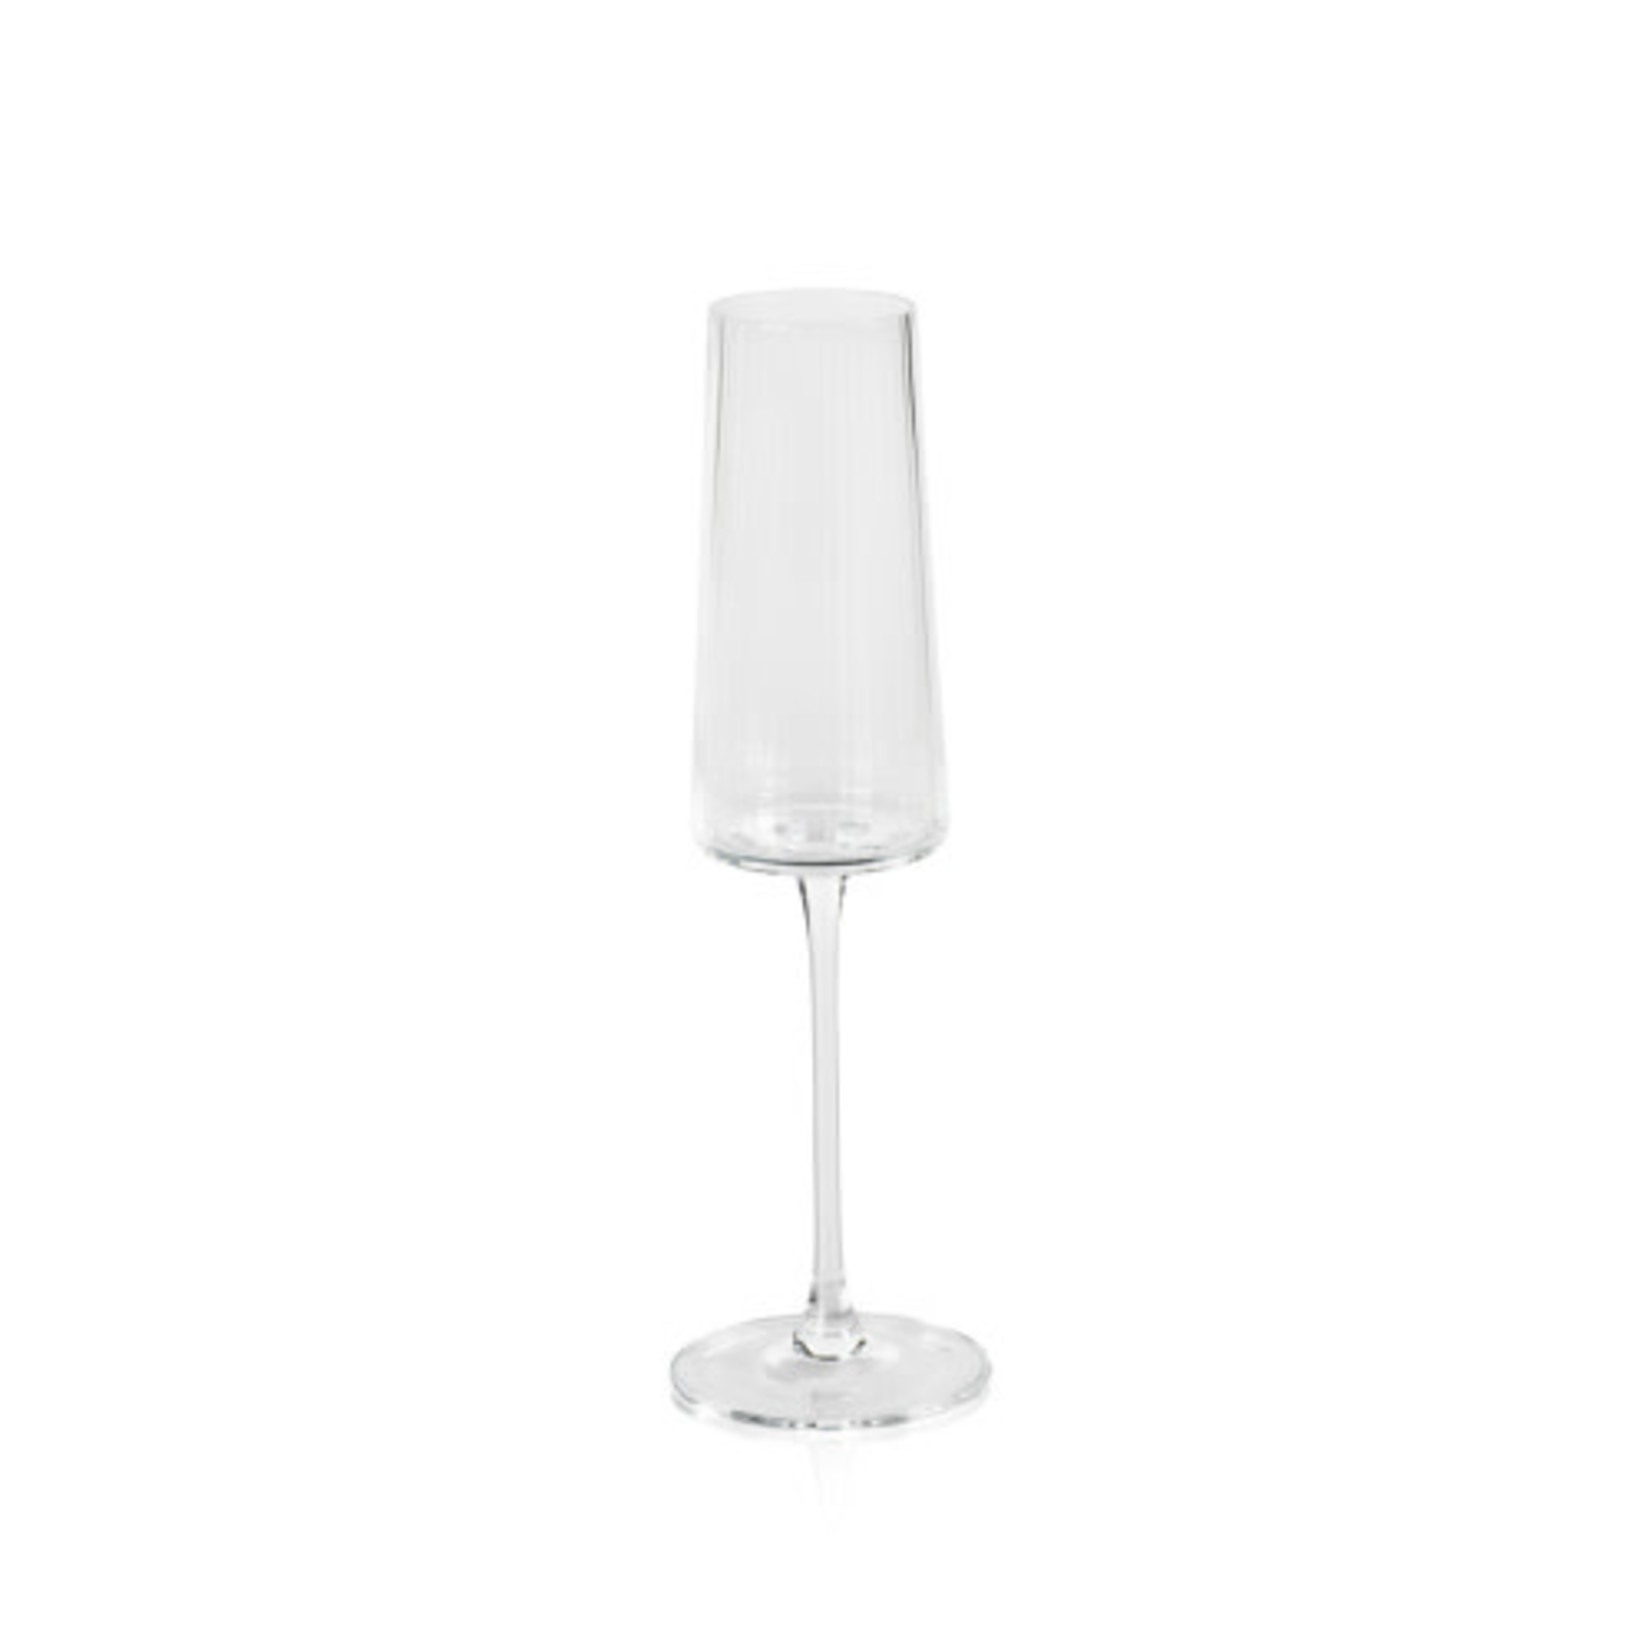 Bandol Fluted Textured Champagne Flute